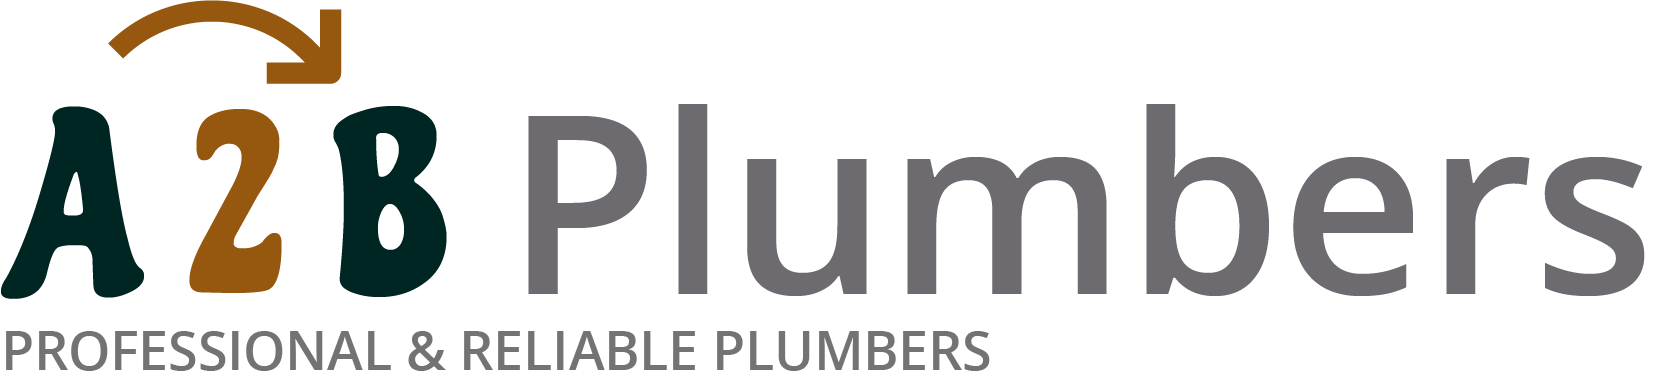 If you need a boiler installed, a radiator repaired or a leaking tap fixed, call us now - we provide services for properties in Stourbridge and the local area.